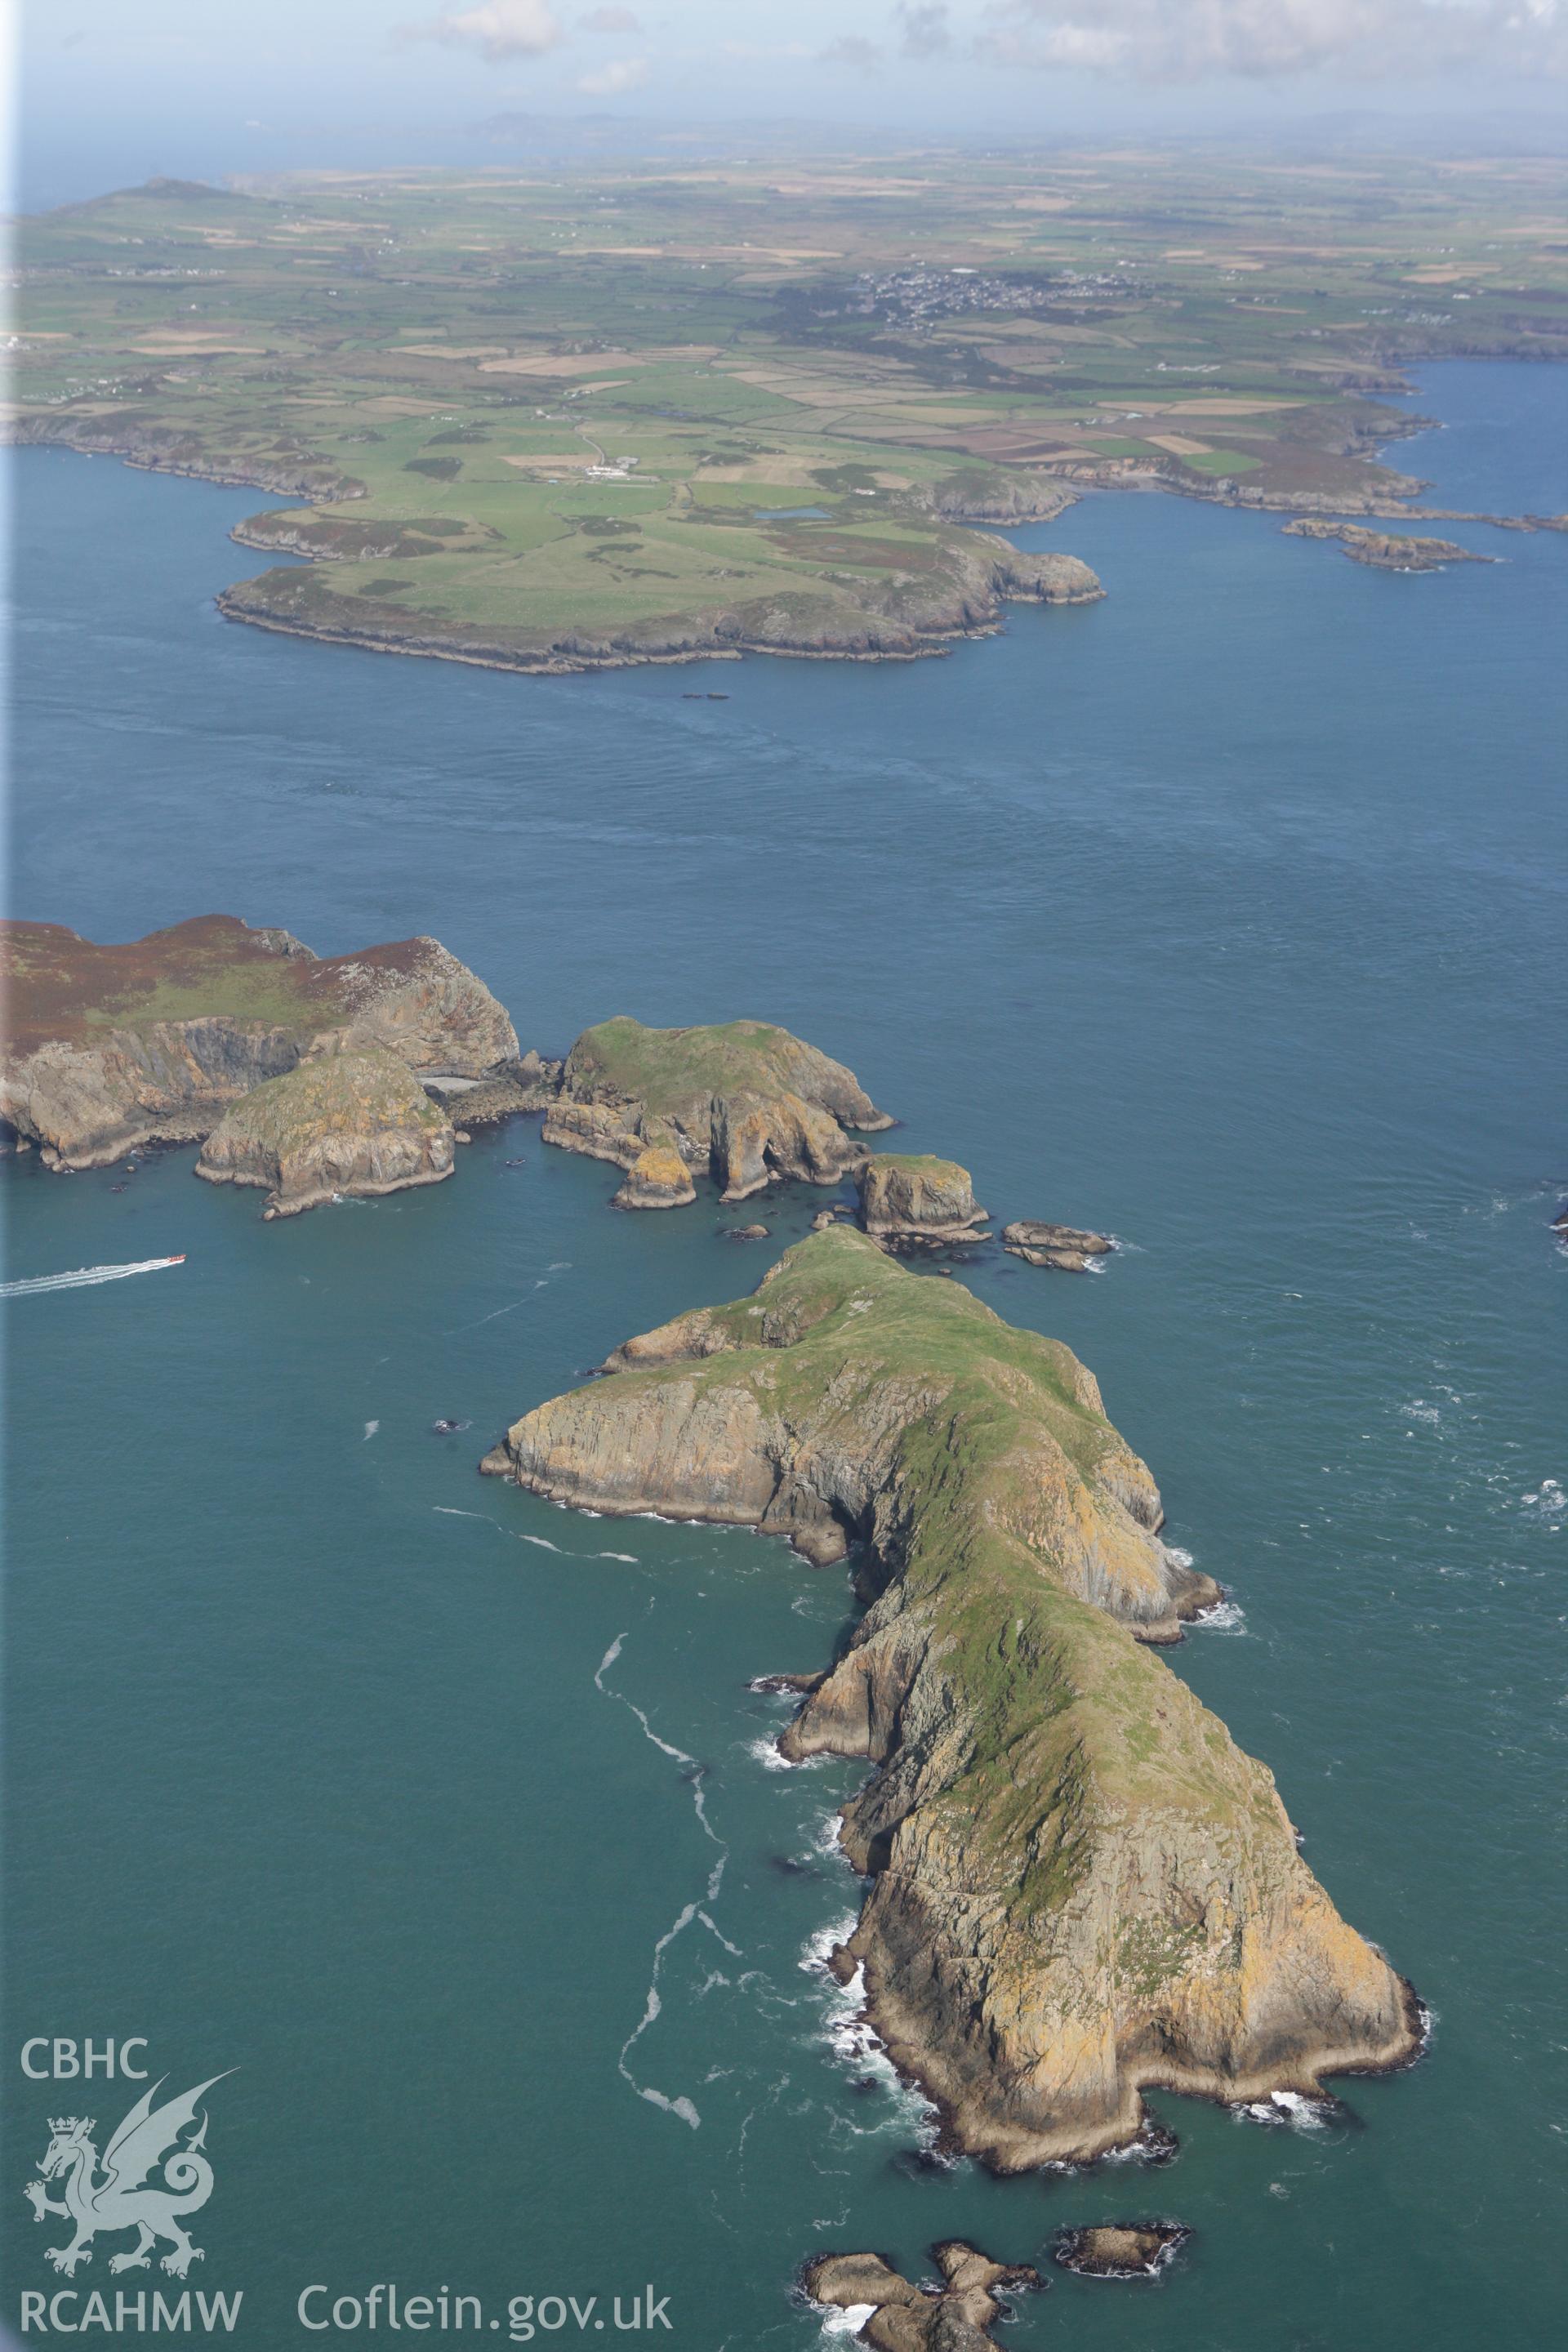 RCAHMW colour oblique photograph of Ynys Bery, Ramsey Island. Taken by Toby Driver on 09/09/2010.